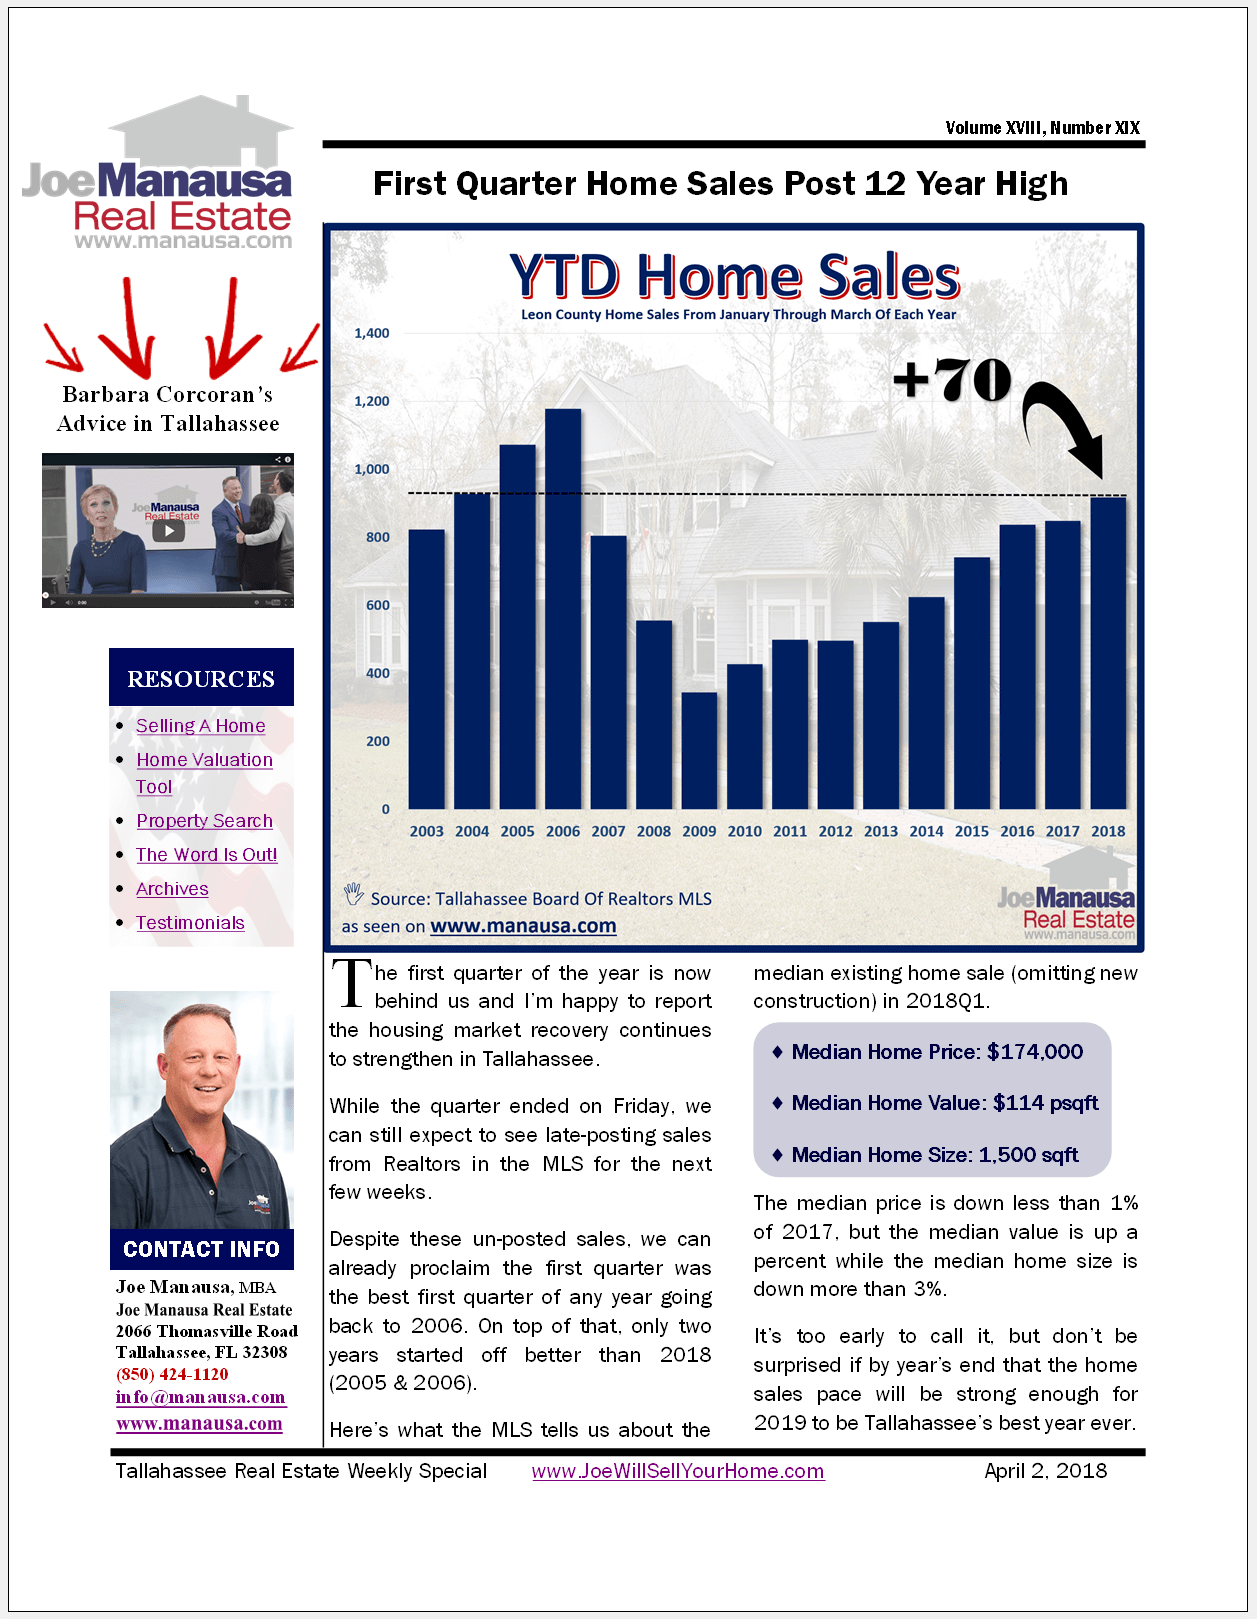 First Quarter Home Sales Post 12 Year High